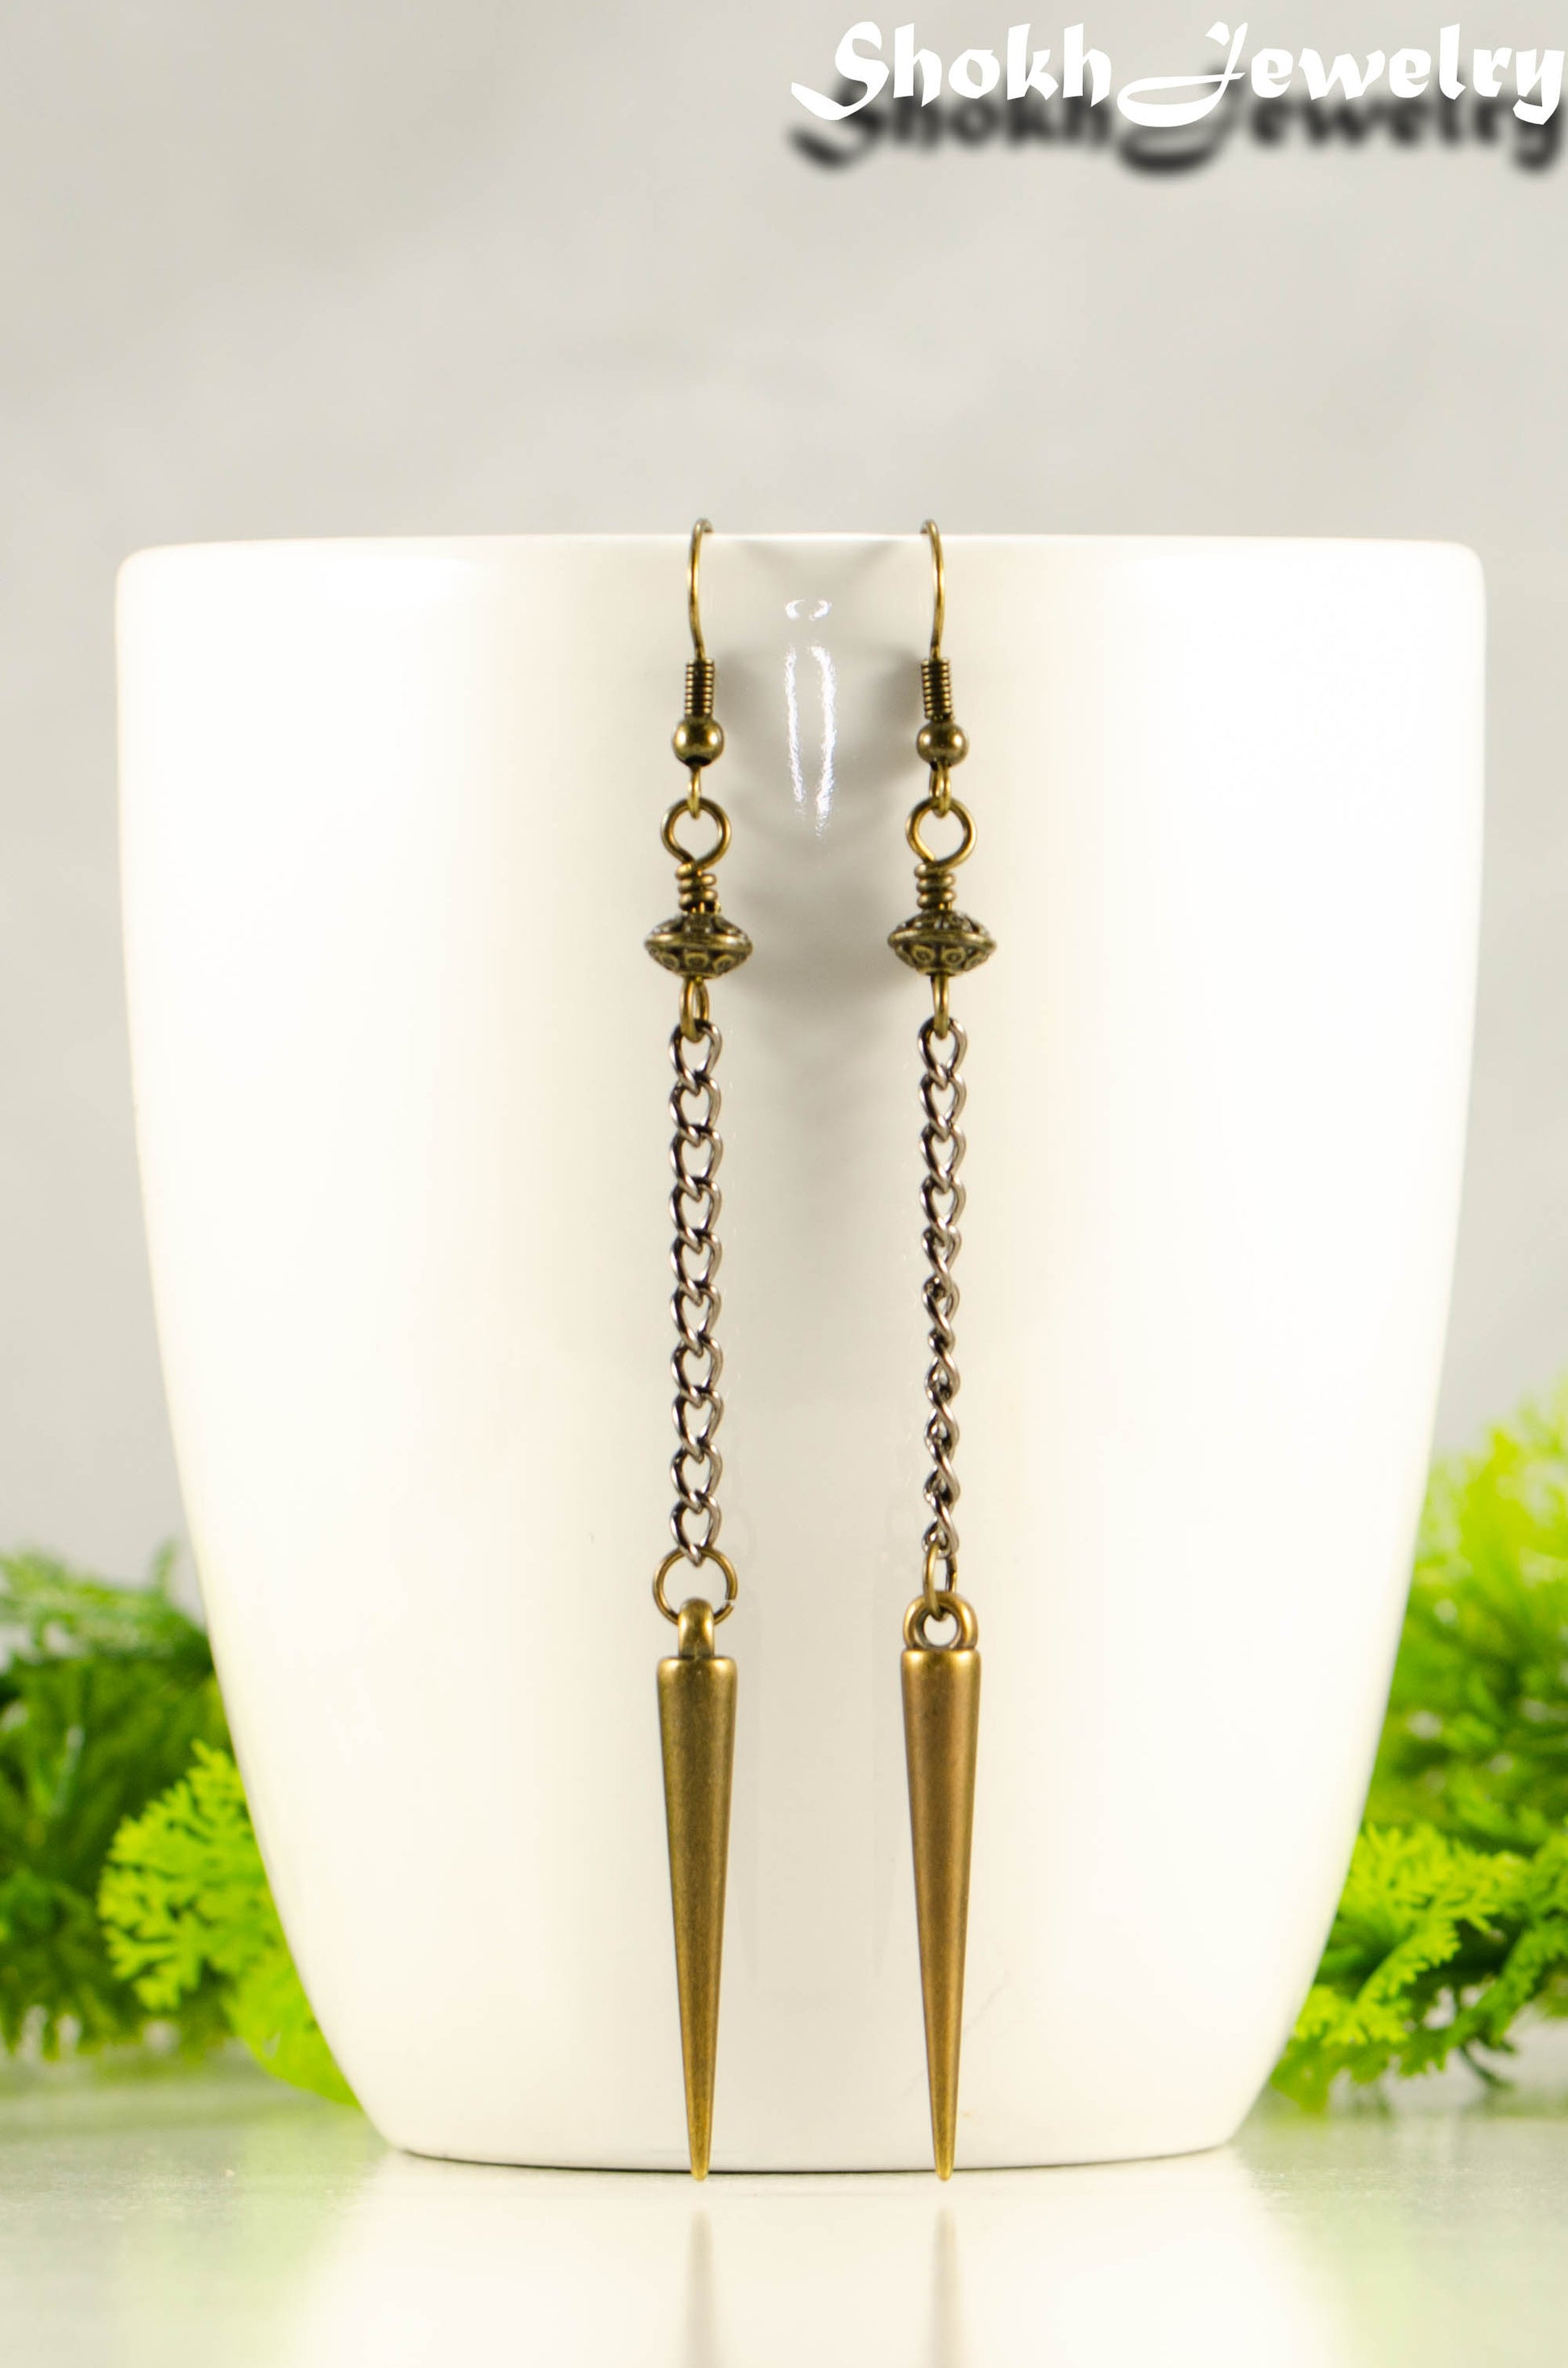 Statement chain and antique bronze spike earrings on a mug